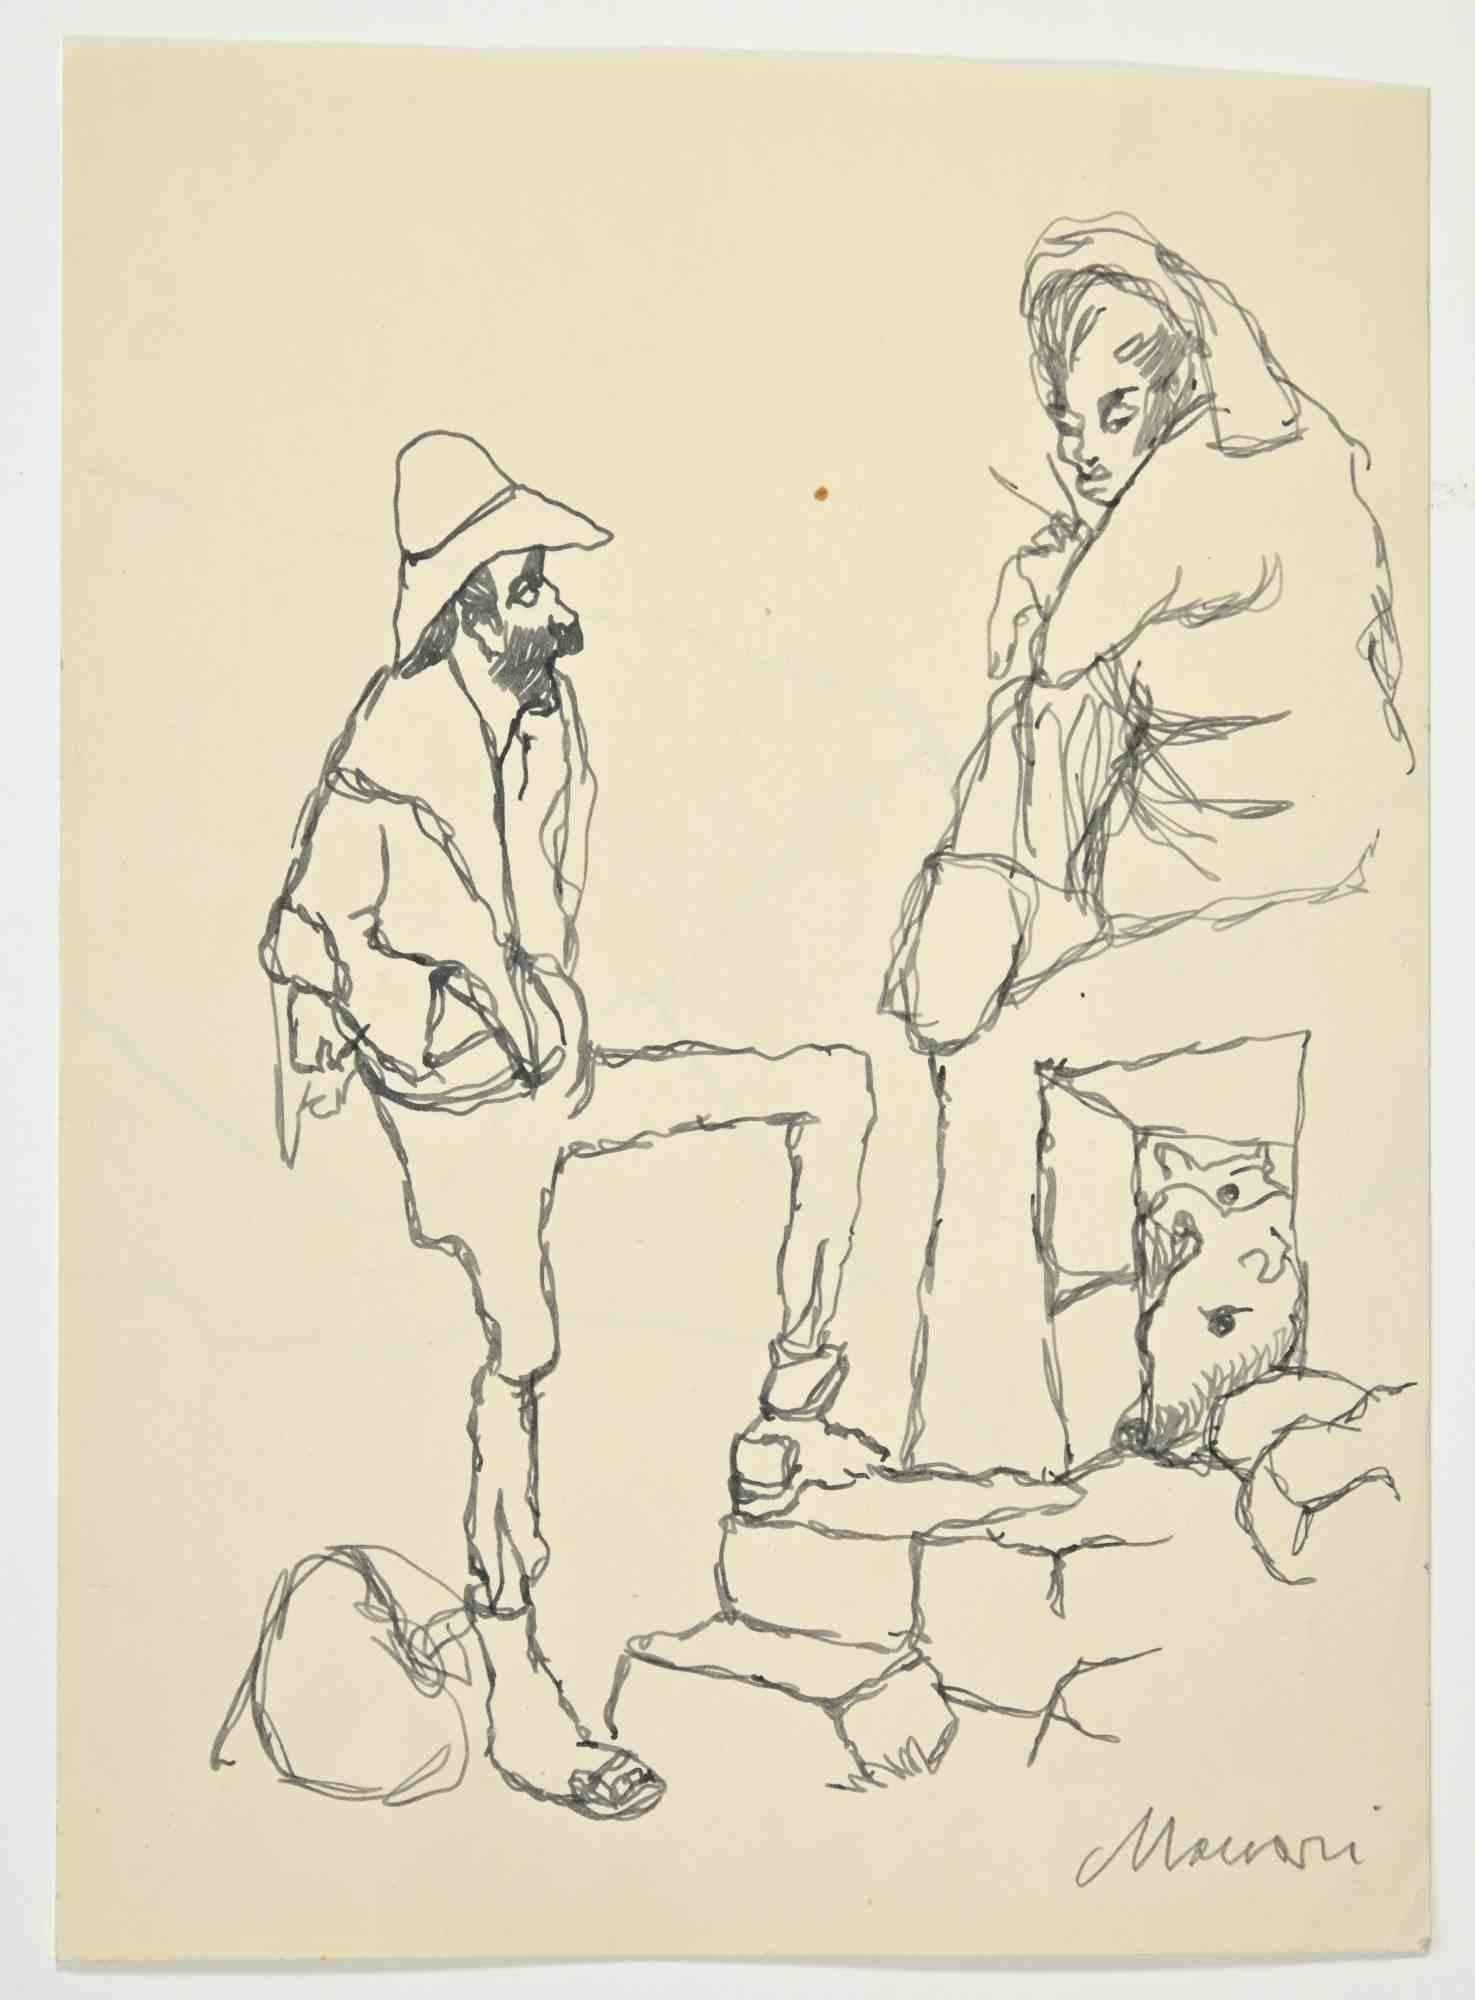 Prisoners is a Pen Drawing realized by Mino Maccari  (1924-1989) in the 1960s.

Hand-signed on the lower.

Good condition.

Mino Maccari (Siena, 1924-Rome, June 16, 1989) was an Italian writer, painter, engraver and journalist, winner of the